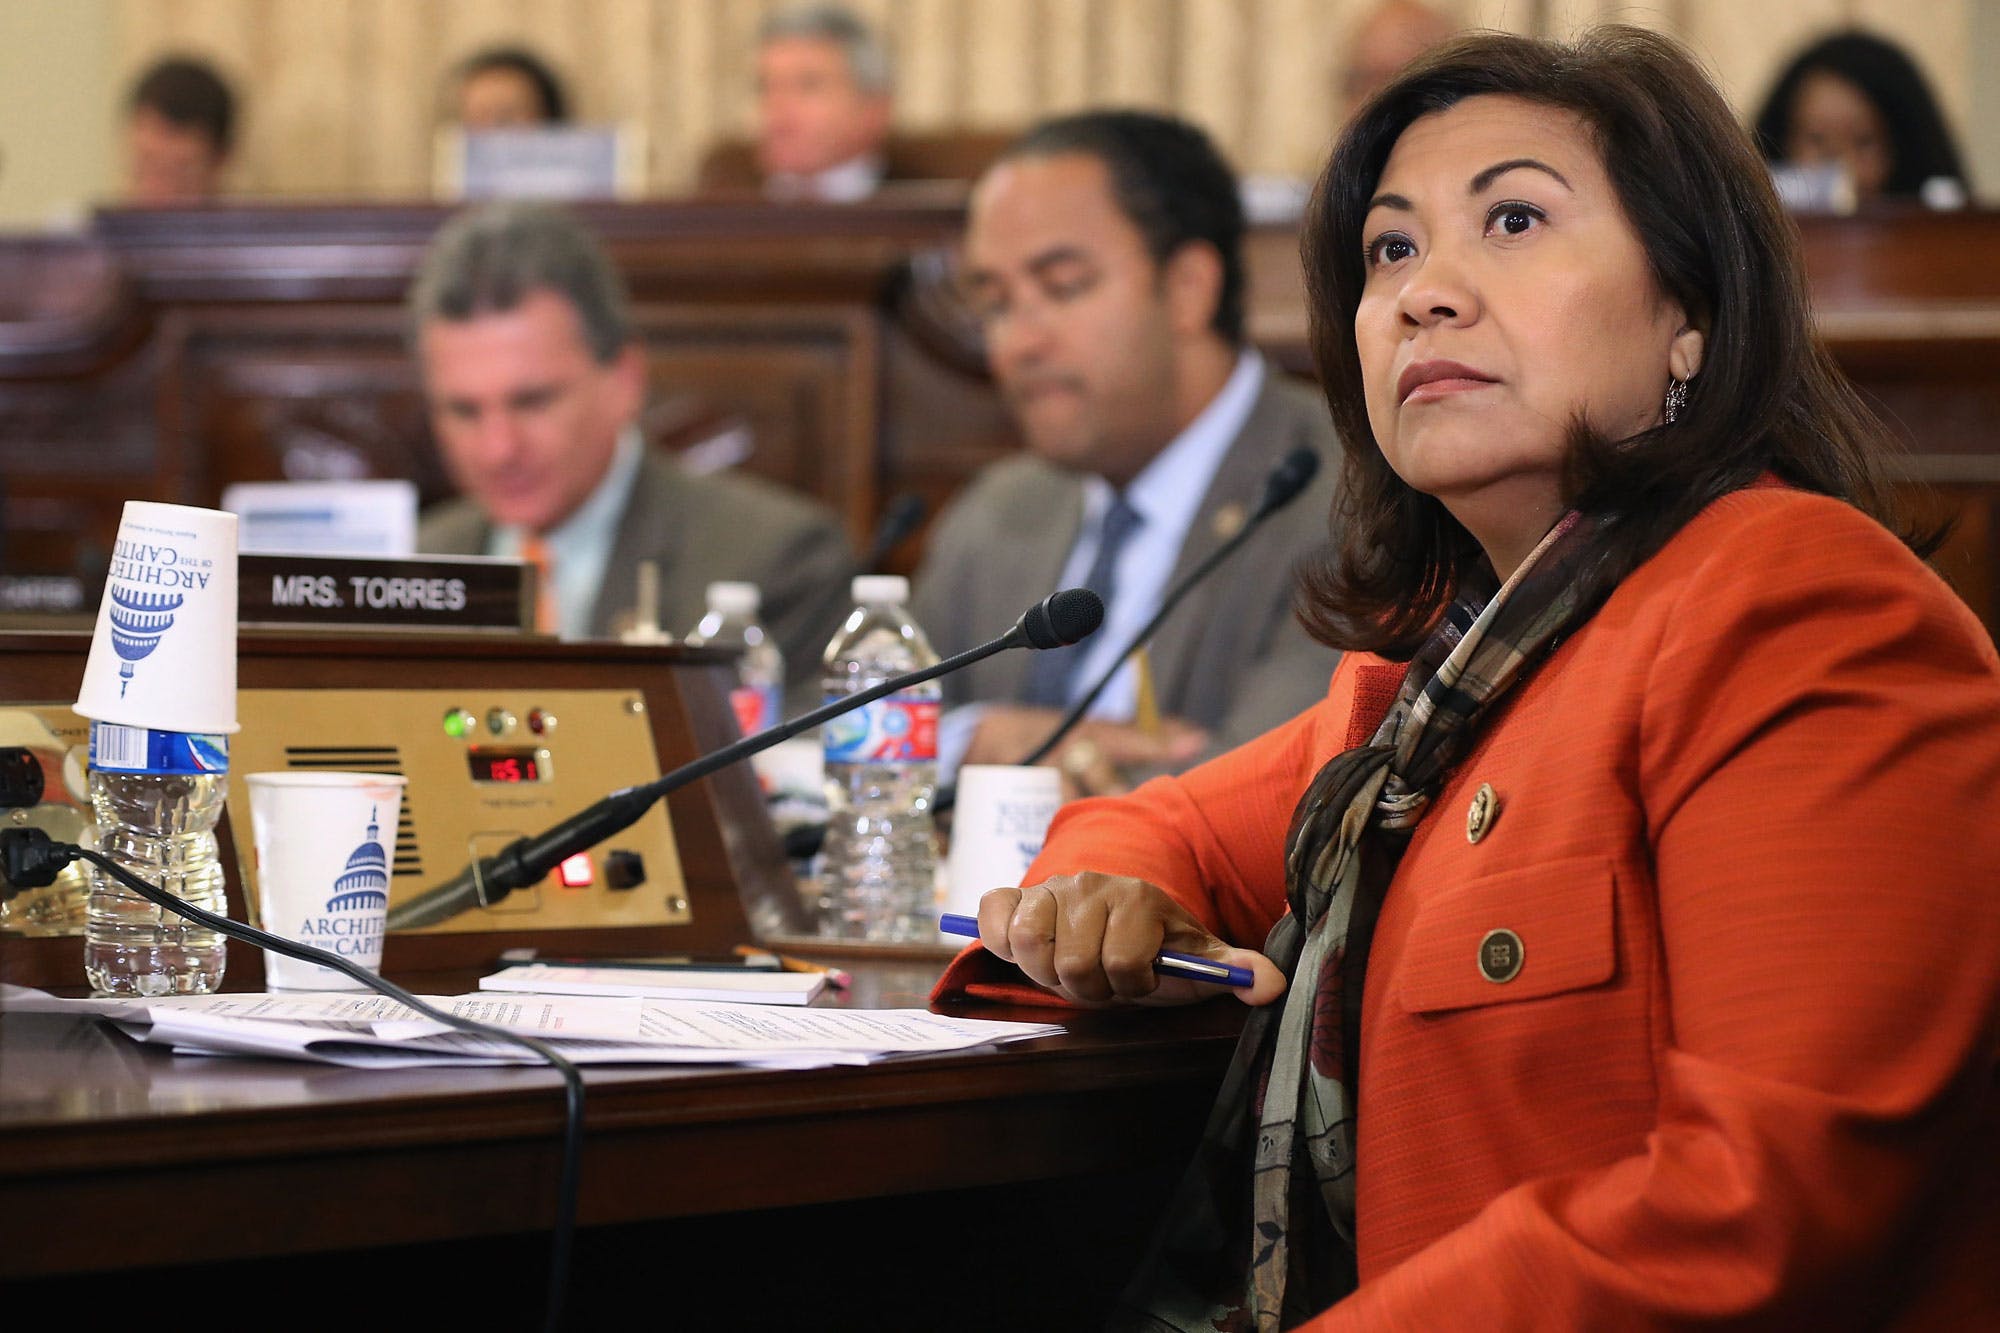 WASHINGTON, DC - OCTOBER 21:  House Homeland Security Committee member Rep. Norma Torres (D-CA) questions witnesses during a hearing about worldwide threats to the United States in the Cannon House Office Building on Capitol Hill on October 21, 2015 in Washington, DC. National Counterterrorism Center Director Nicholas Rasmussen, Homeland Security Secretary Jeh Johnson and Federal Bureau of Investigation Director James Comey were questioned about ISIS recruitment of young women, its use of social media and their limited resources due to budget sequestration.  (Photo by Chip Somodevilla/Getty Images)